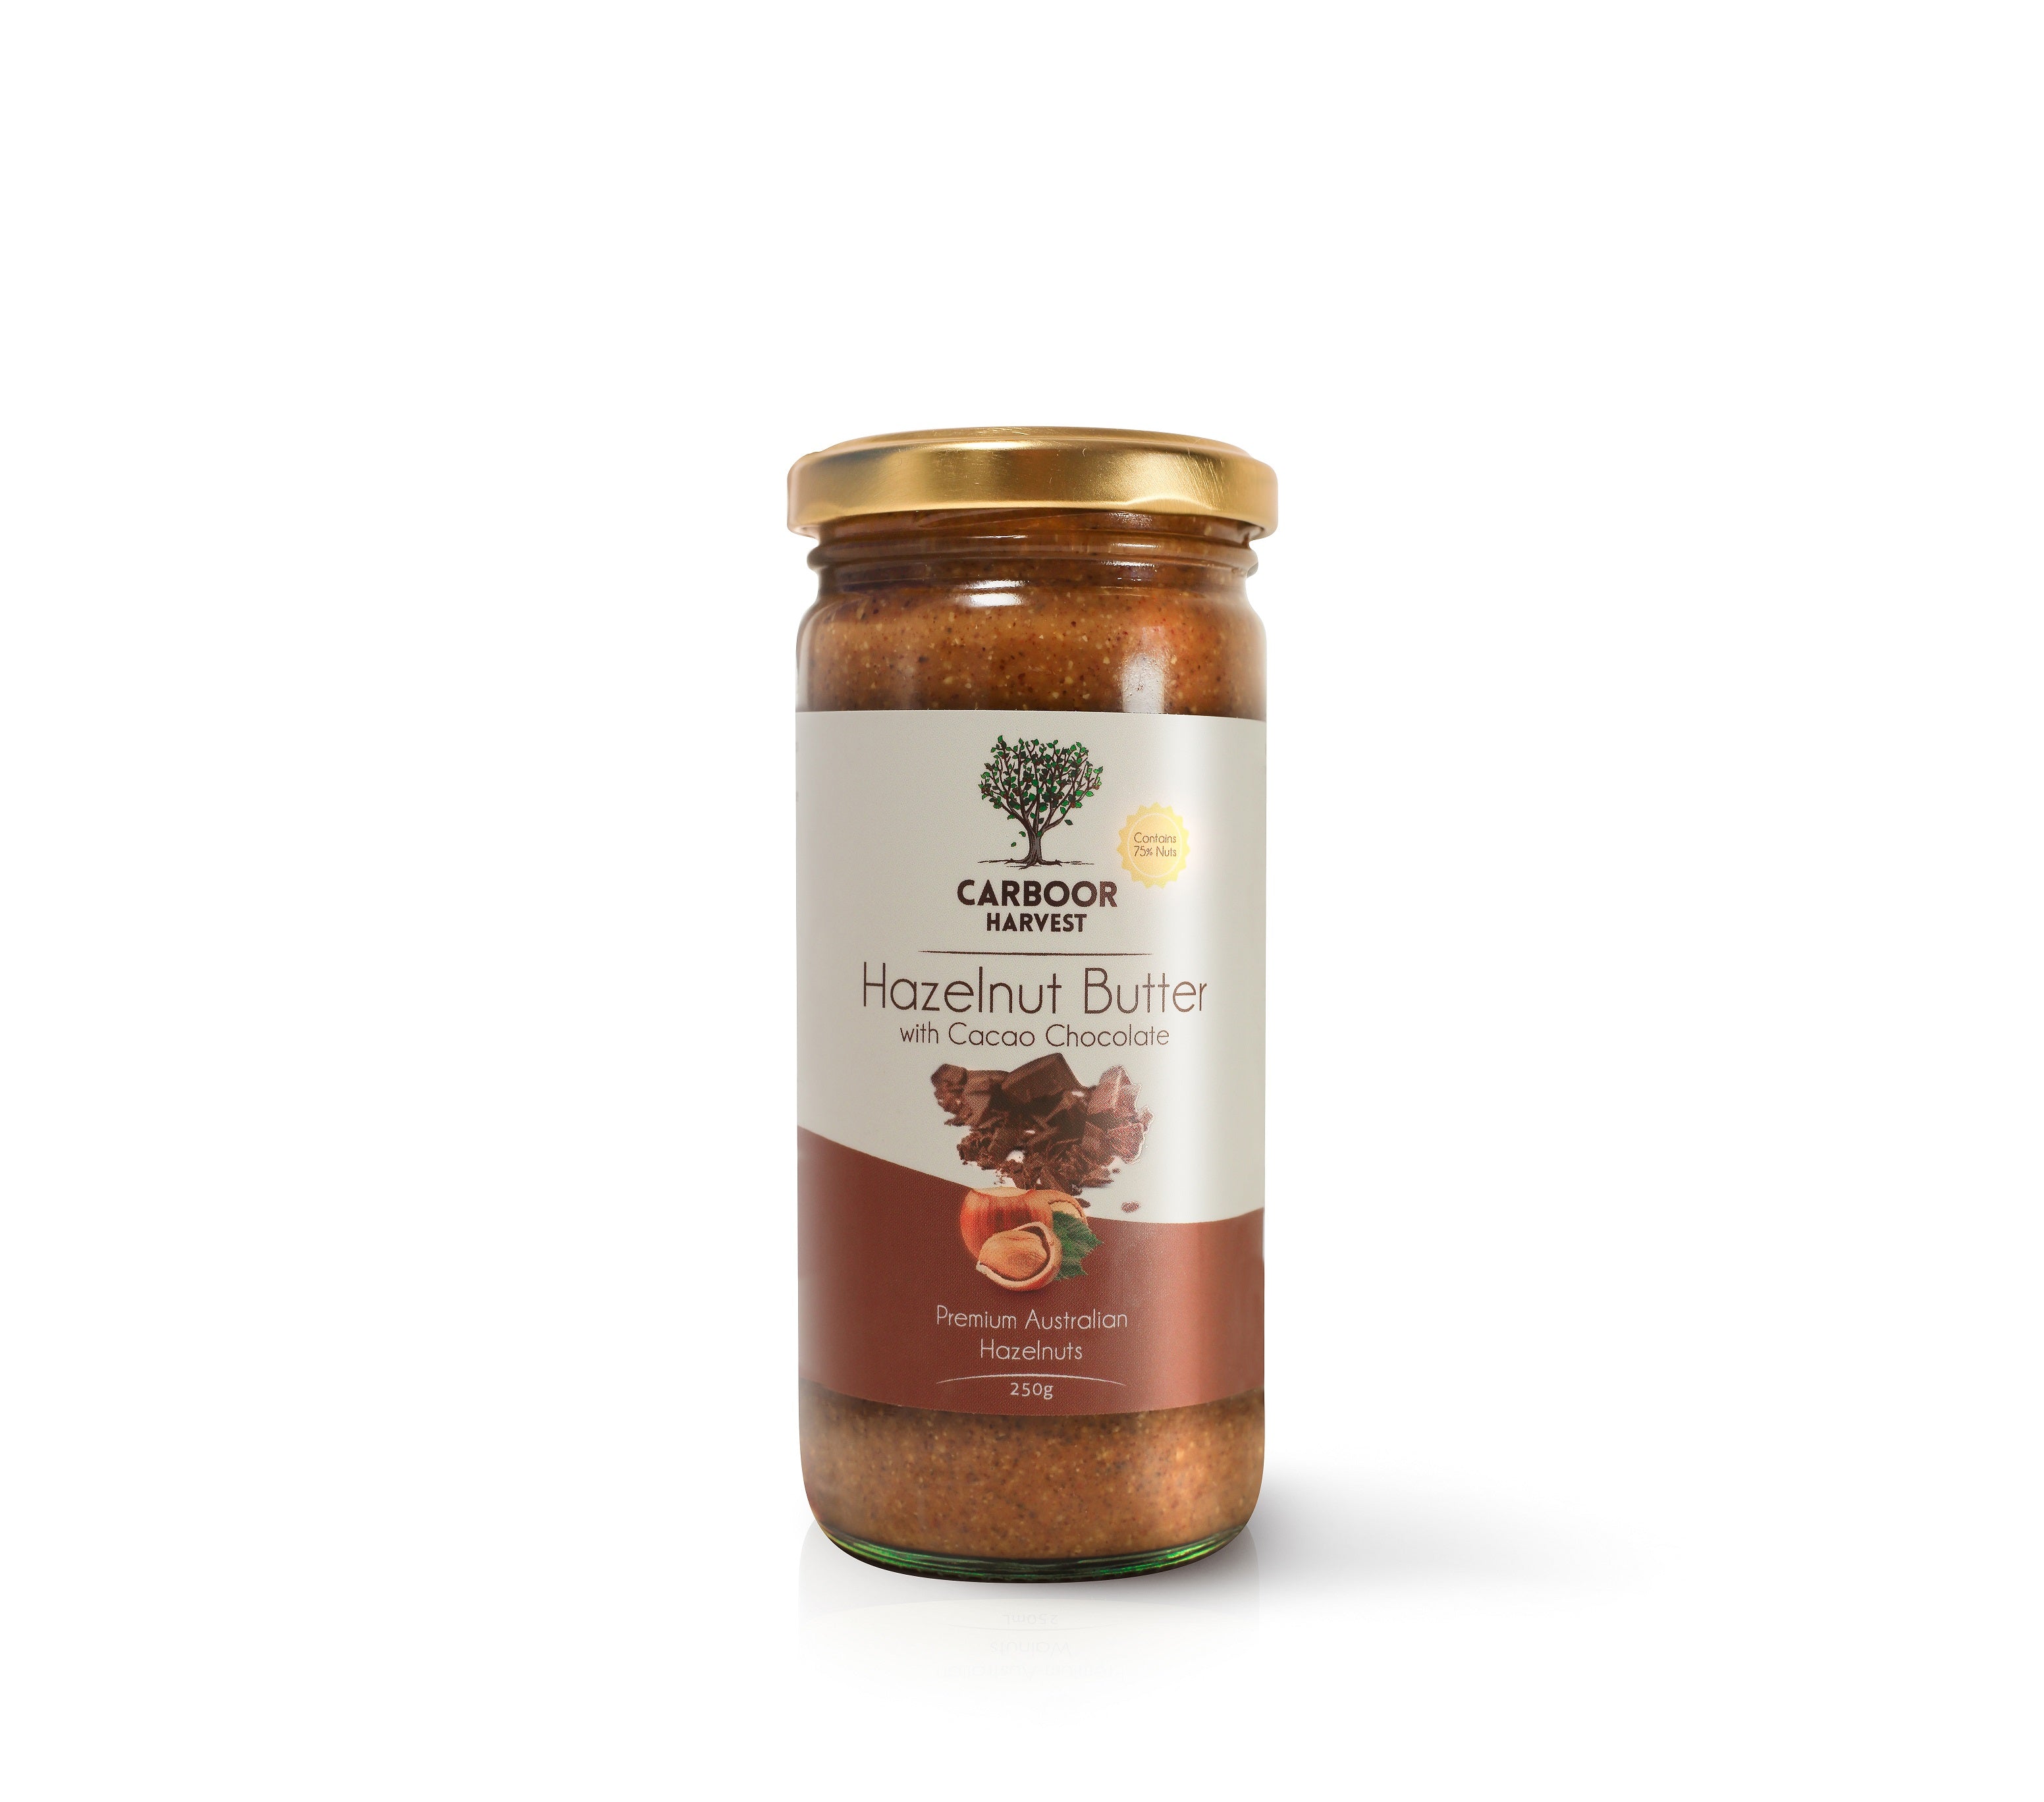 Hazelnut Butter with Cacao Chocolate